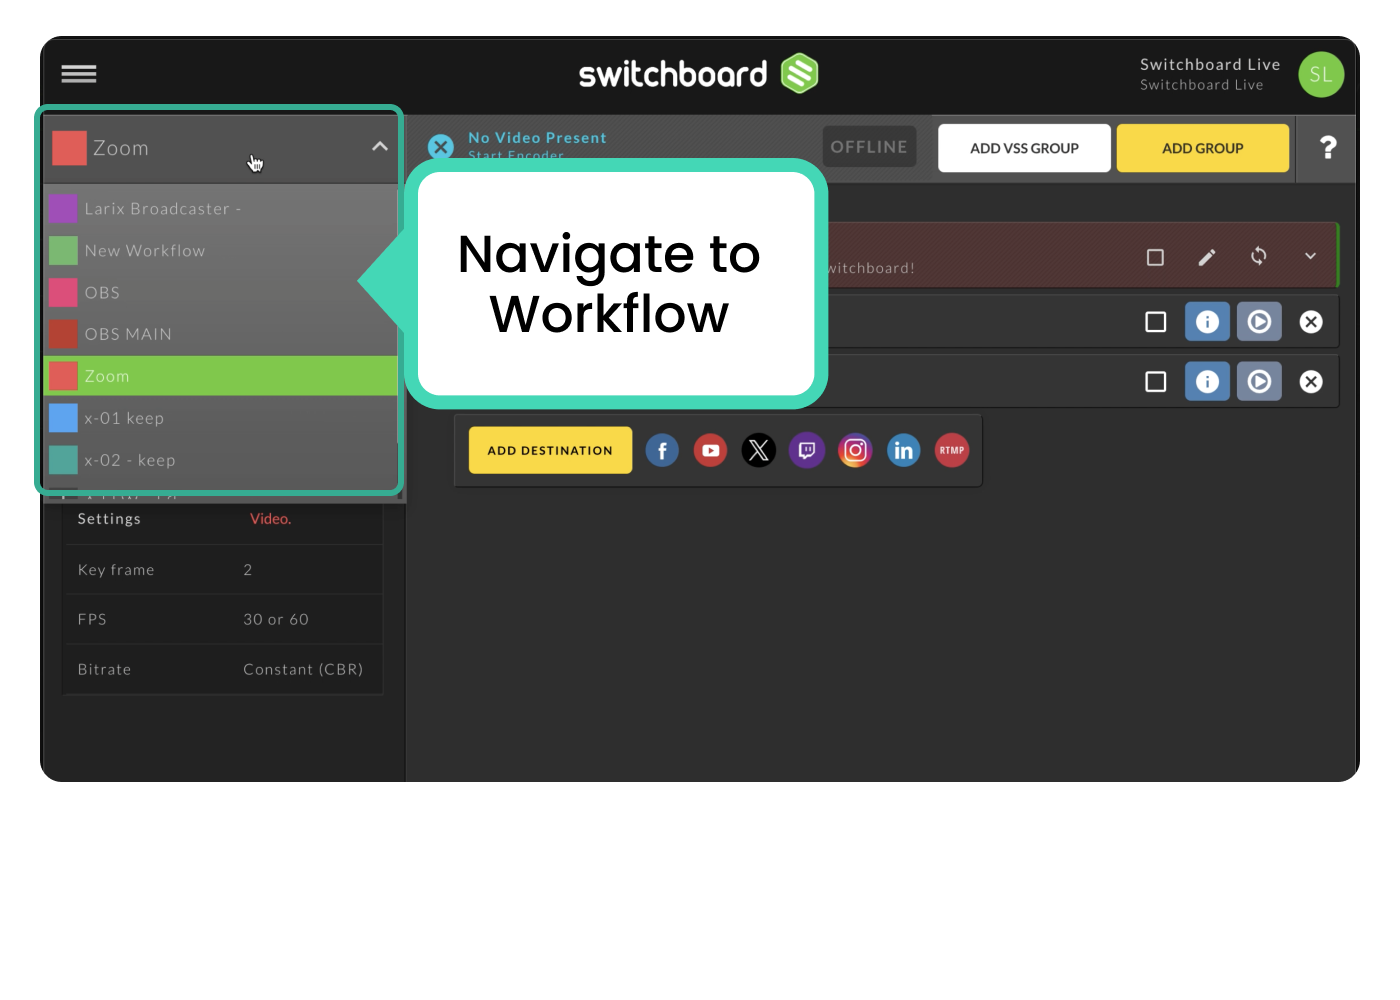 Movedestination-btwn-workflows-switchboardlive-howto 10.png